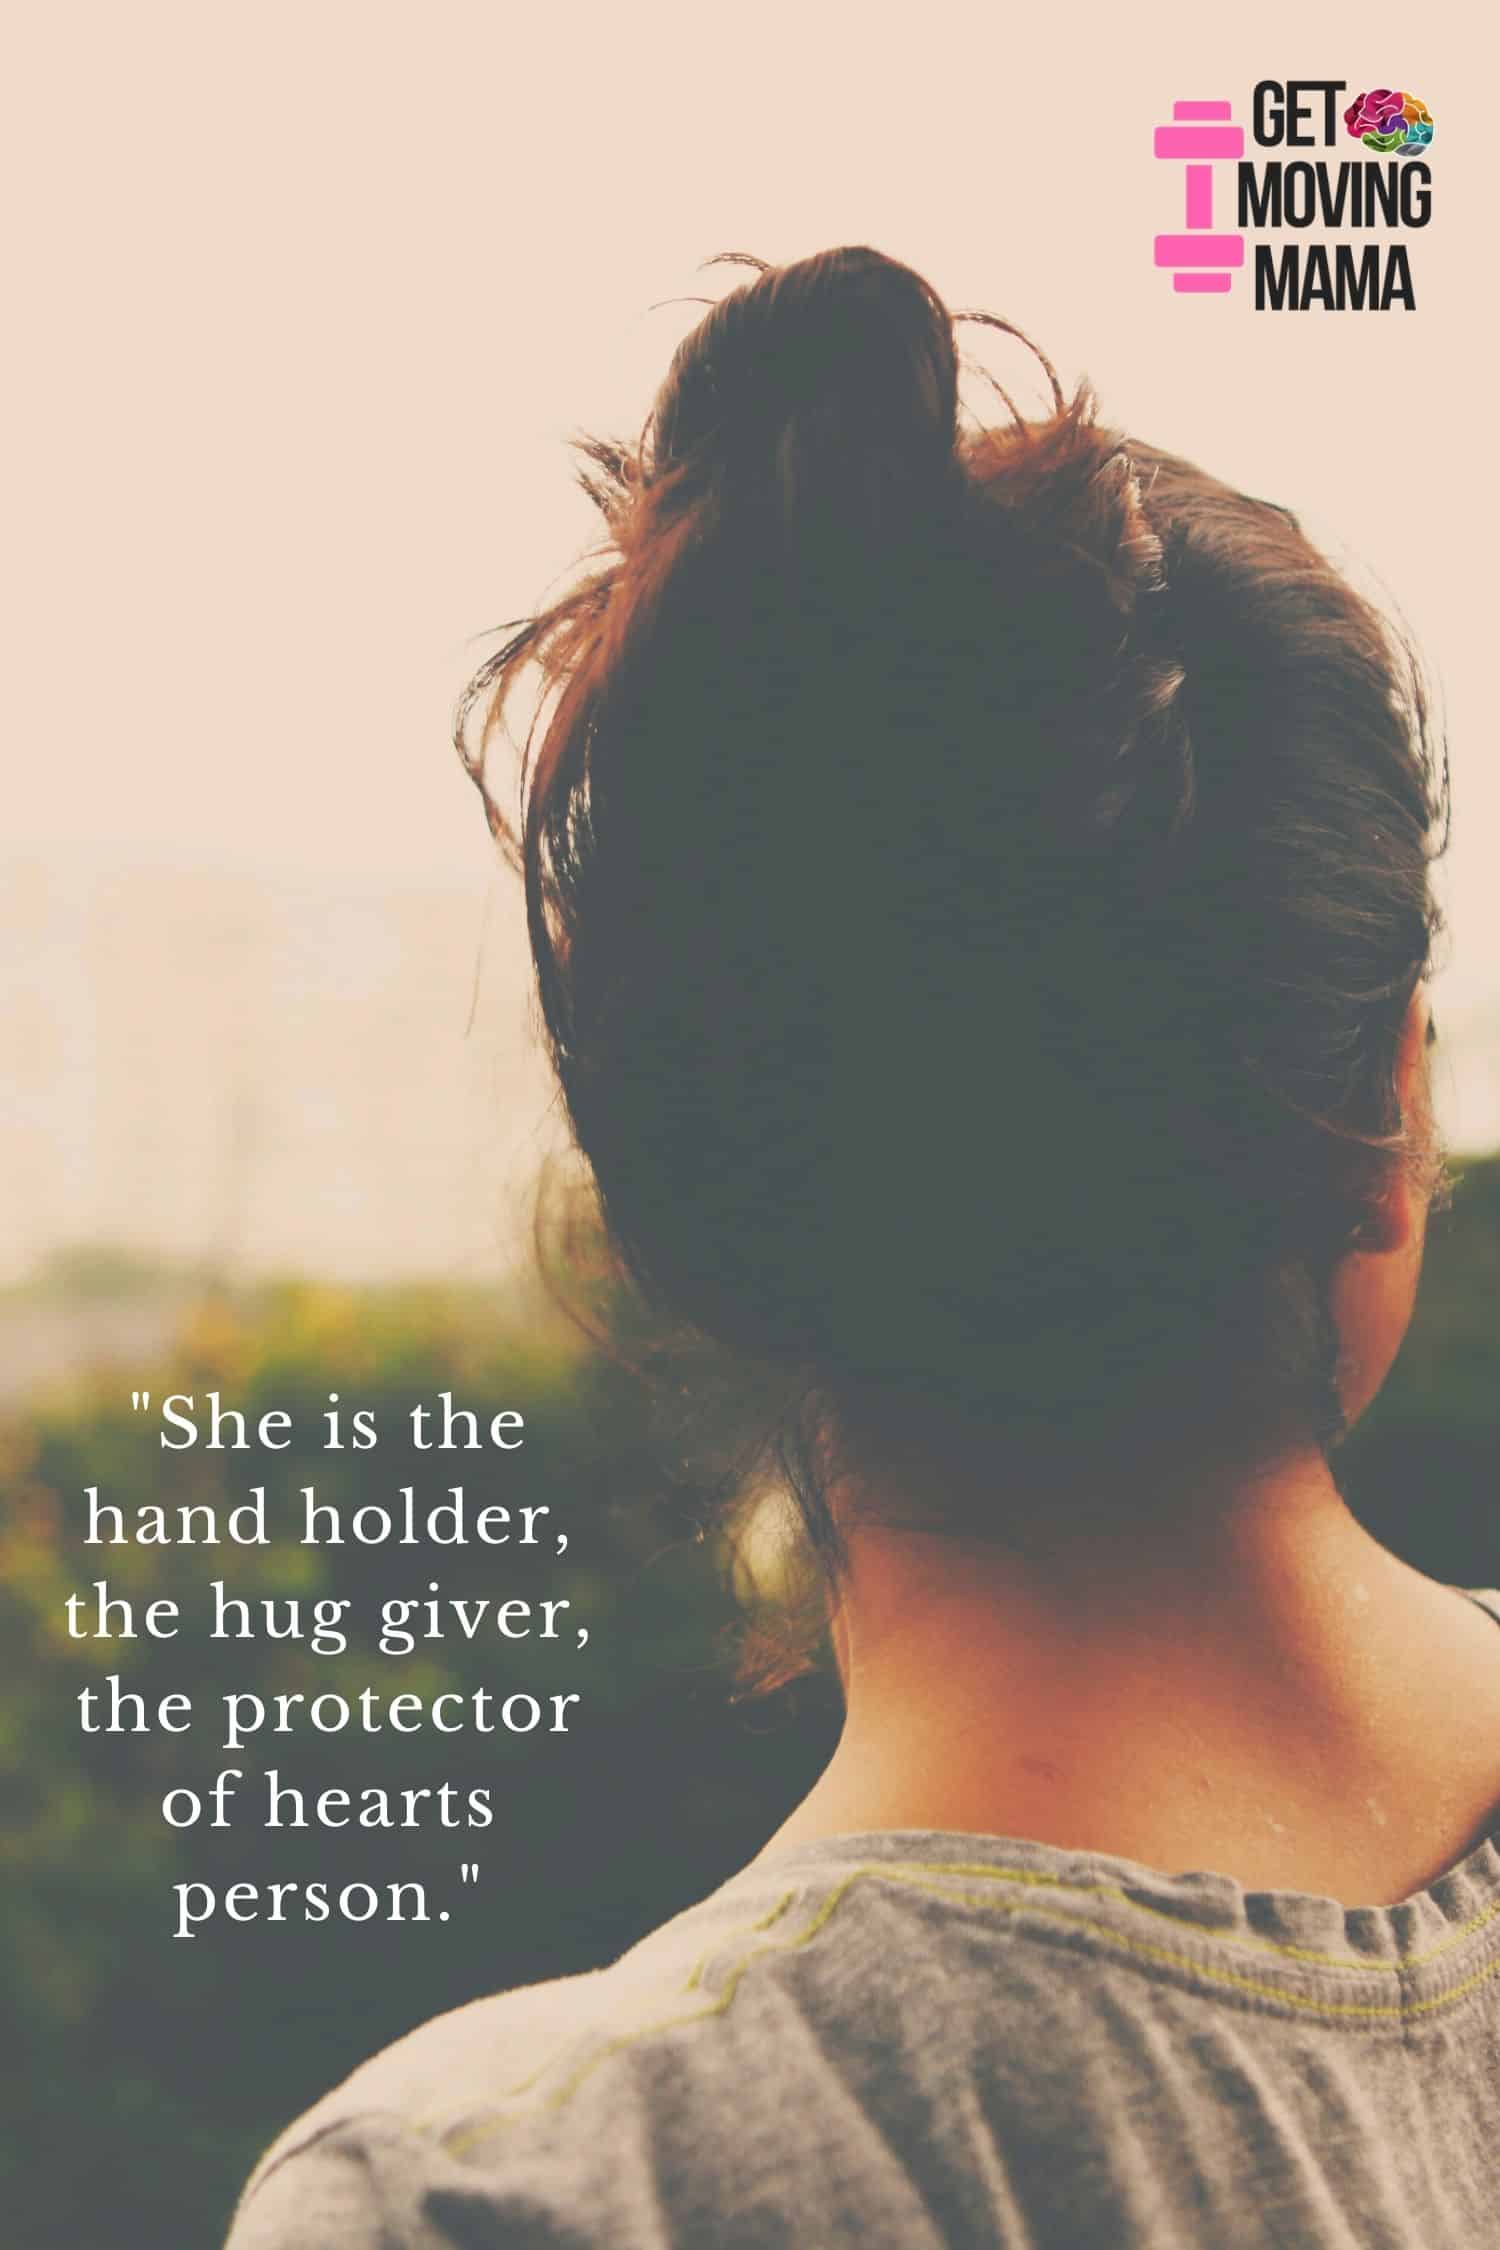 A picture of a woman staring into the distance with a quote that says "she is the hand holder, the hug giver, the protector of hearts person".